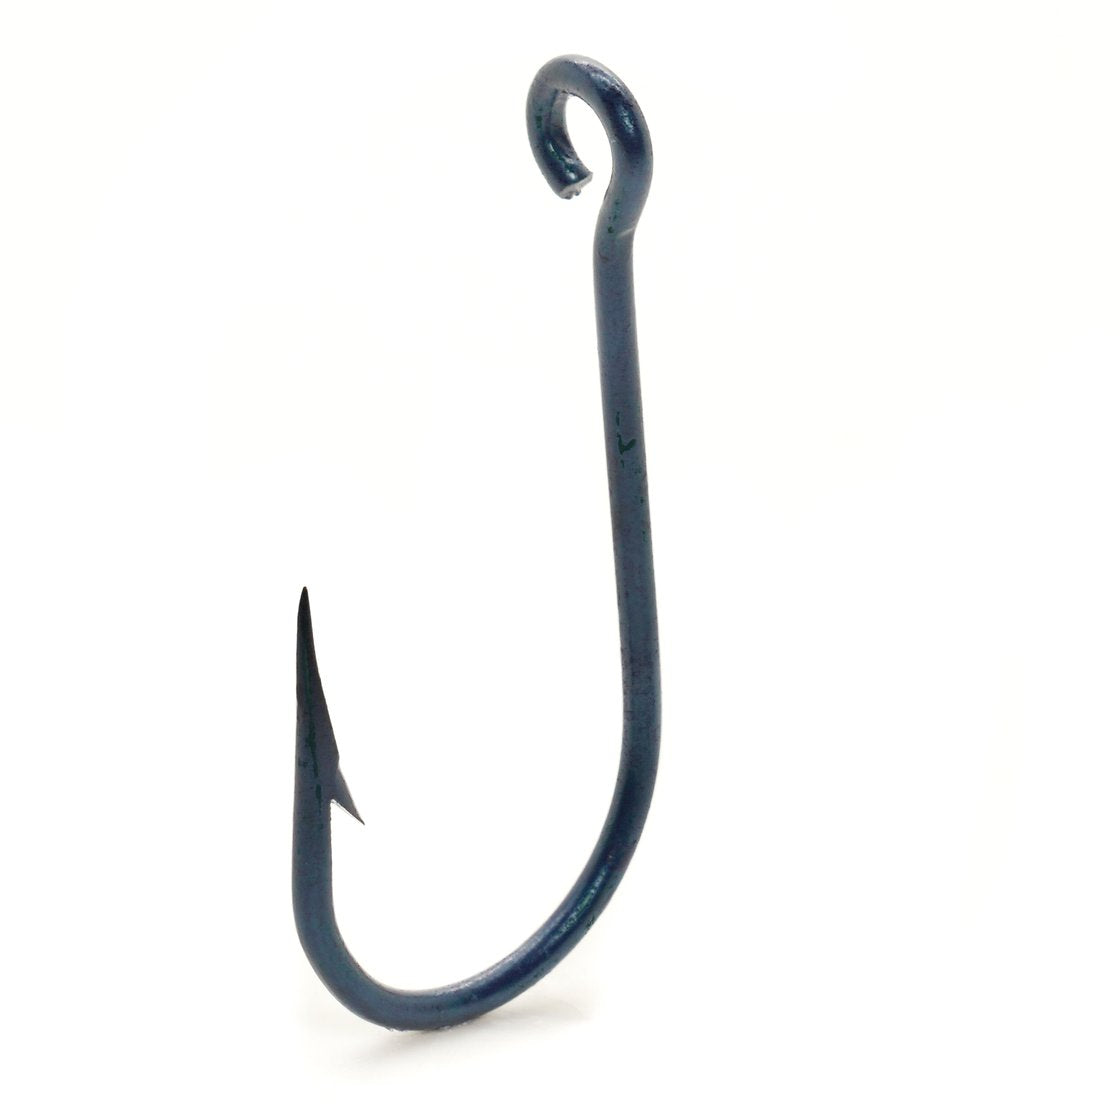 High Quality Sea Mustad Fishing Hooks Mustad Treble Hook 7794 Ds#, 3xBold,  And 3 Strengthen DACROMET Treated Super Seawater 8 PacksFrom Tuiyunzhang,  $40.88